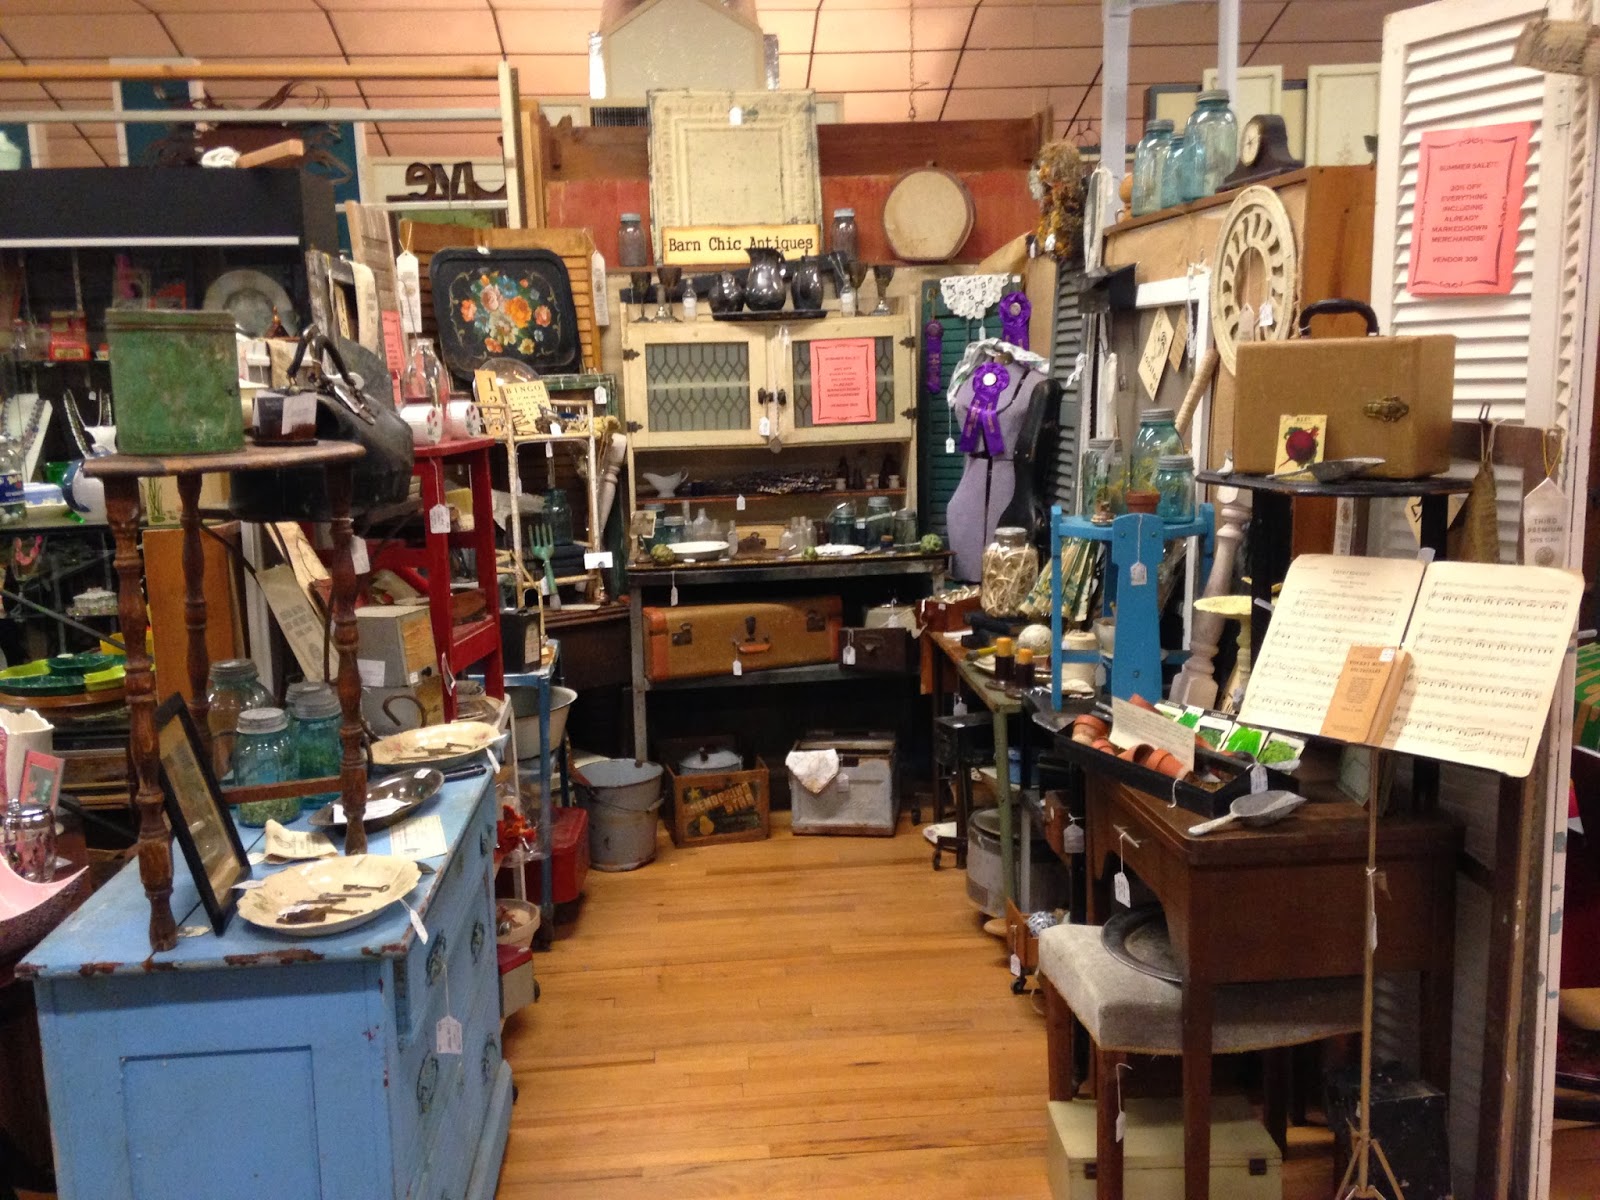 Barn Chic Antiques: Thank you, Austin Antique Mall